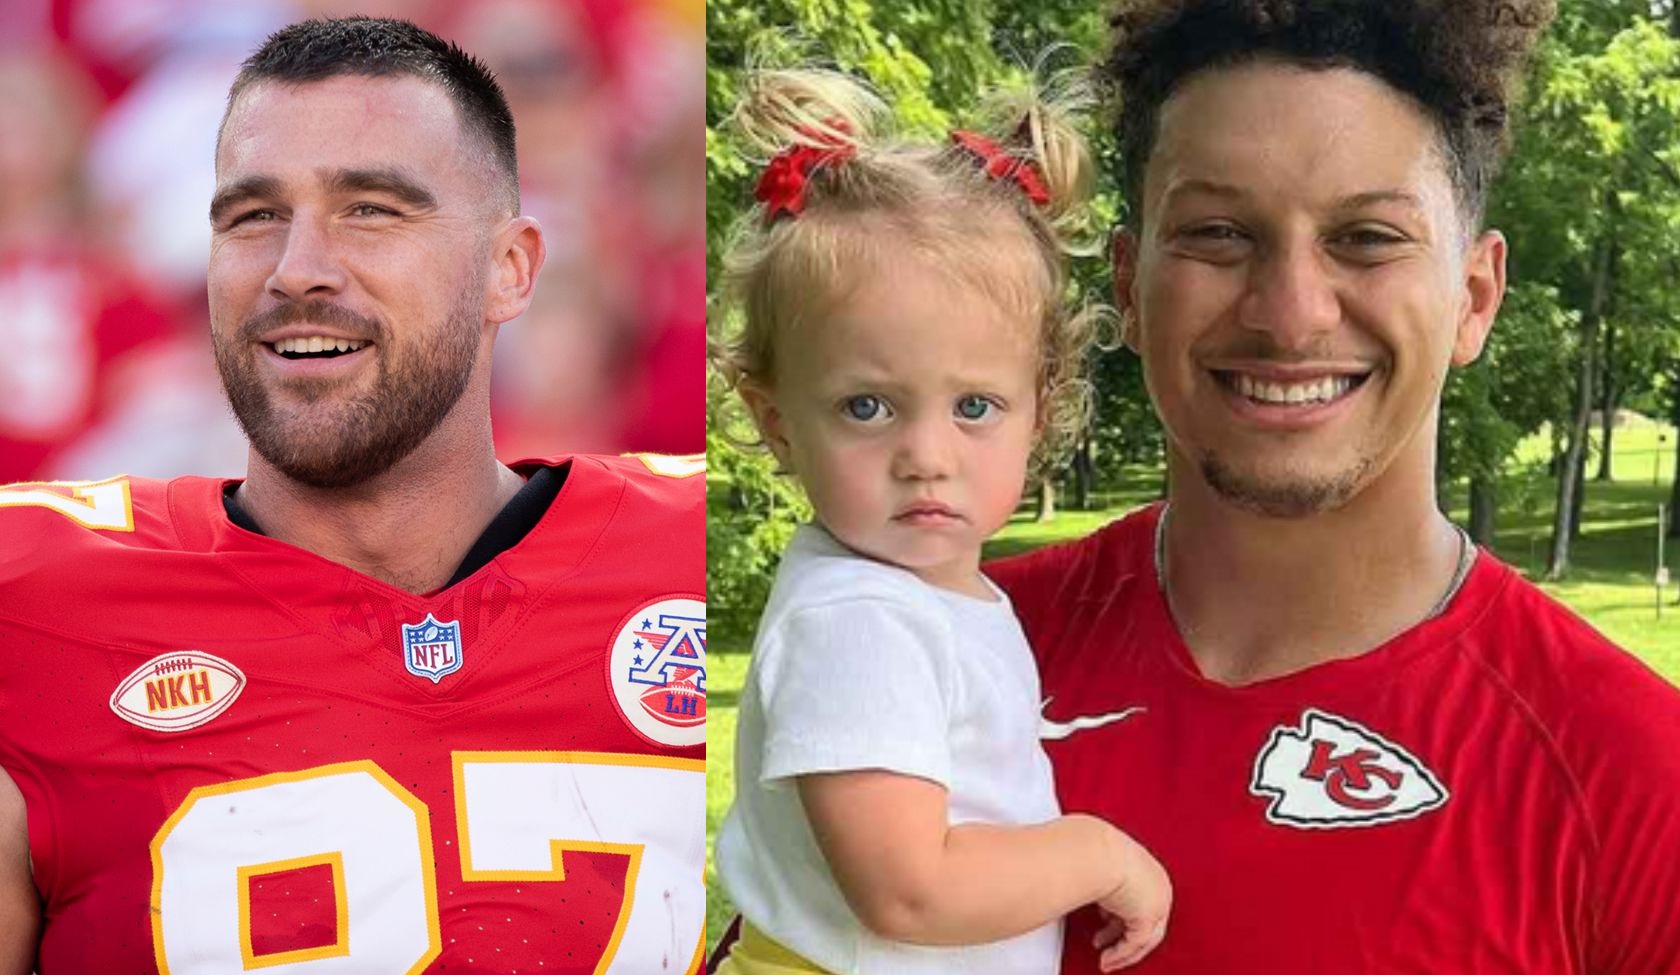 "I never knew all these years she was never my daughter," Patrick Mahomes expresses in shock upon discovering that Travis Kelce is the biological father of Sterling.